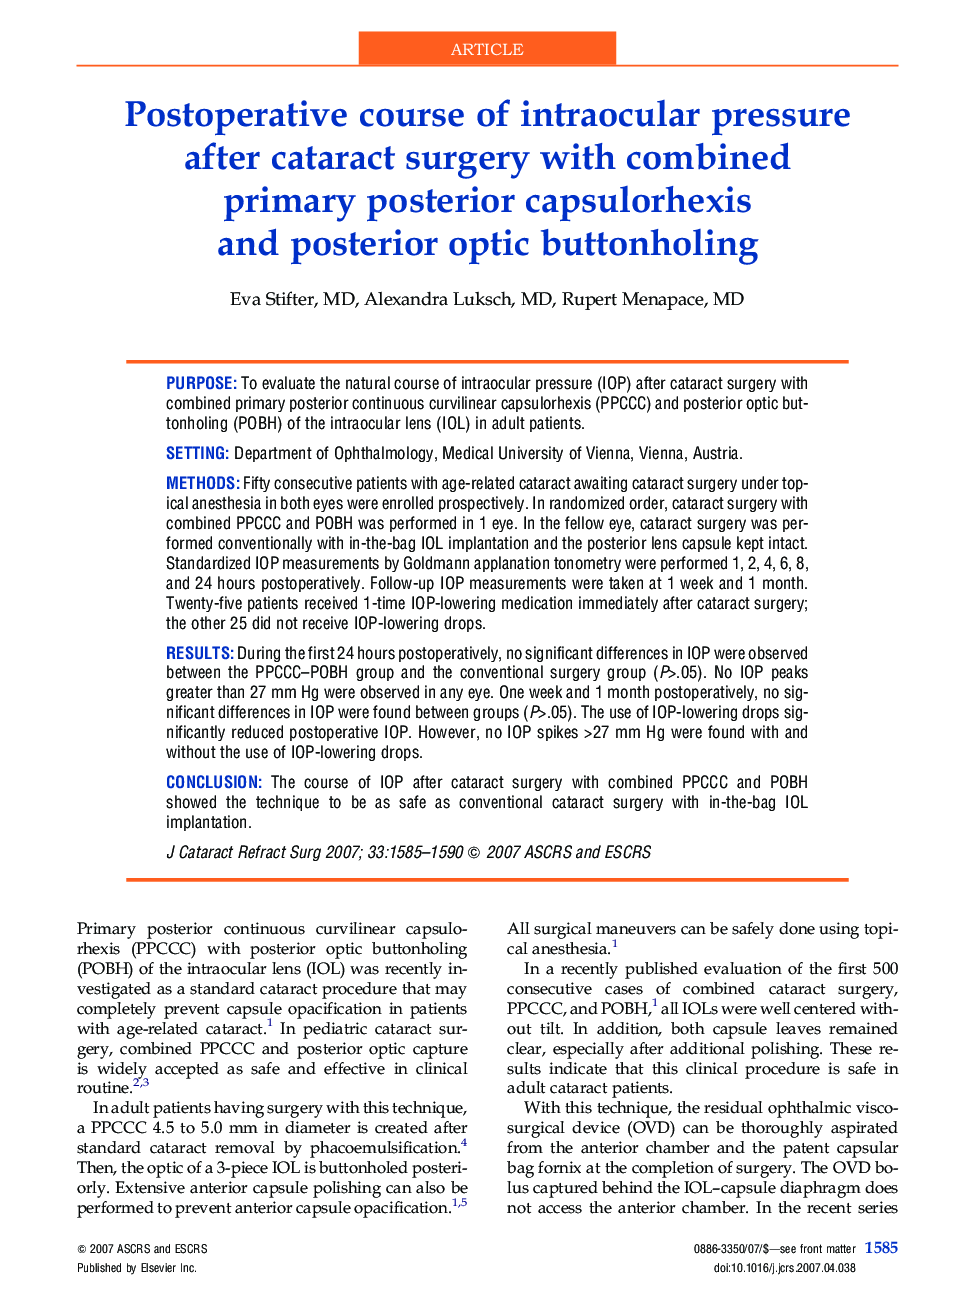 Postoperative course of intraocular pressure after cataract surgery with combined primary posterior capsulorhexis and posterior optic buttonholing